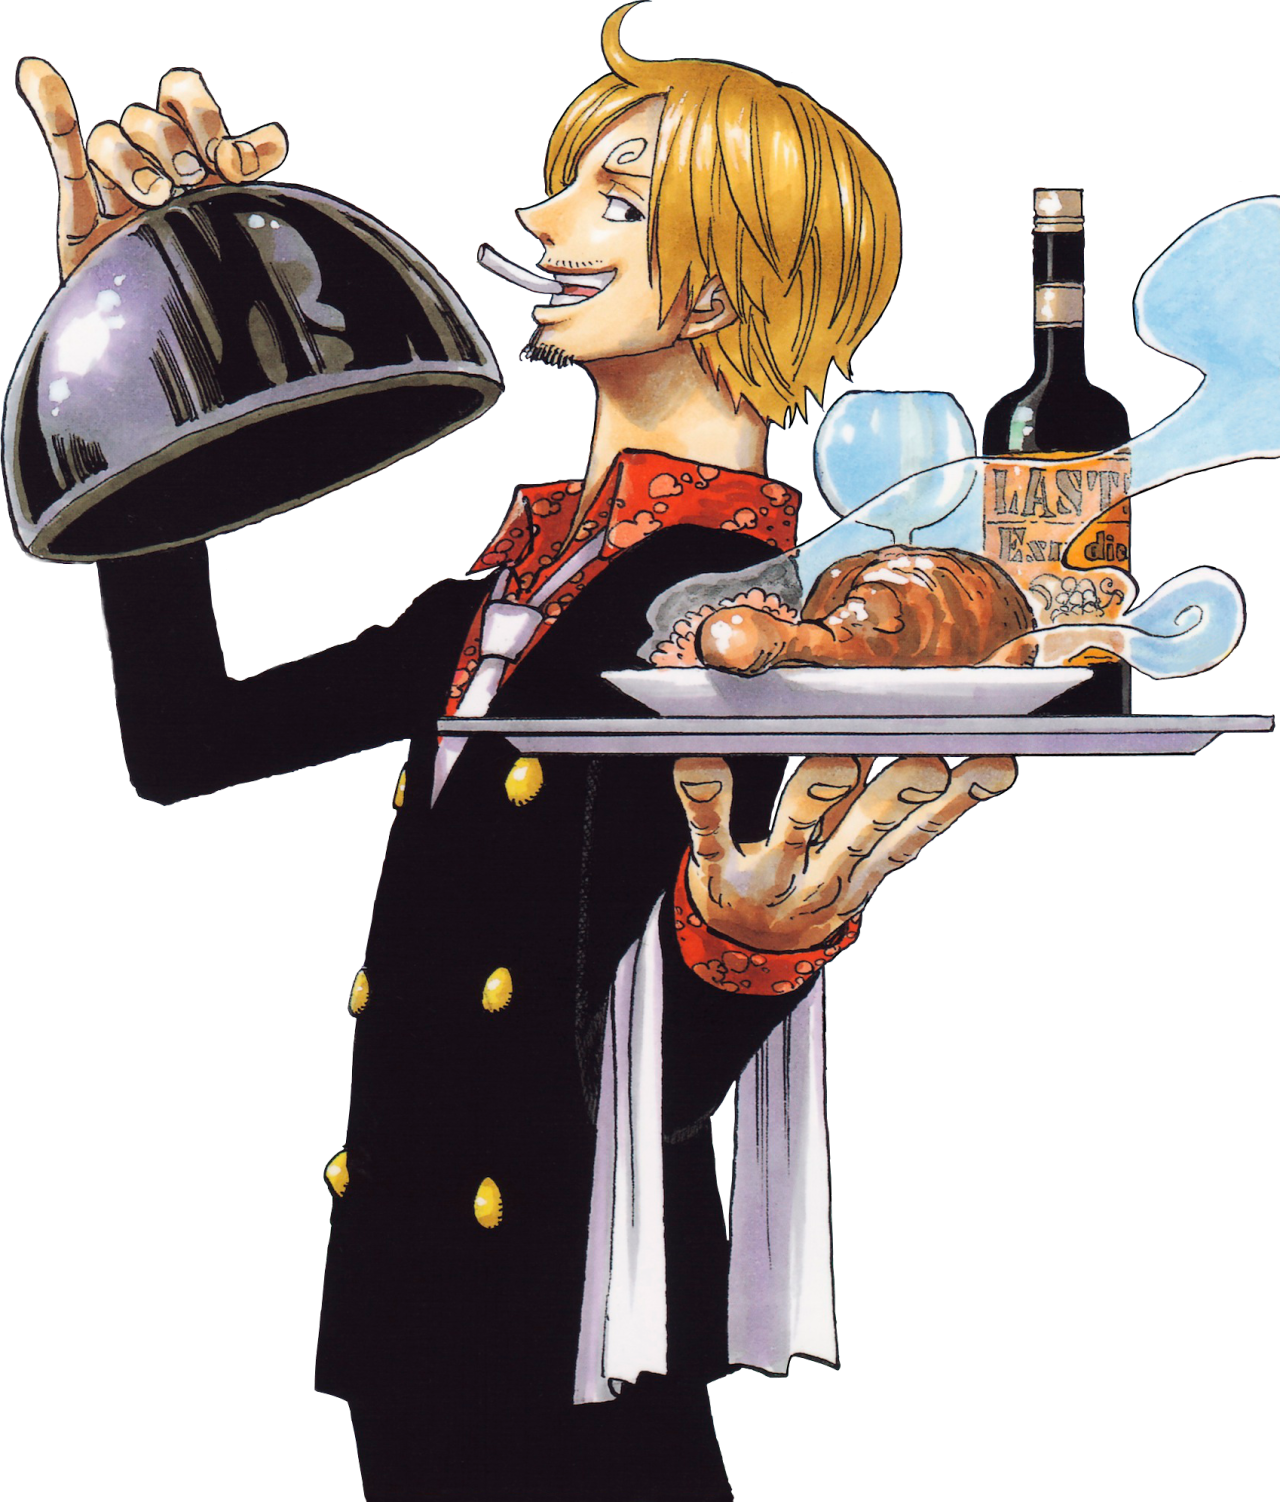 A Cartoon Of A Man Holding A Tray With Food